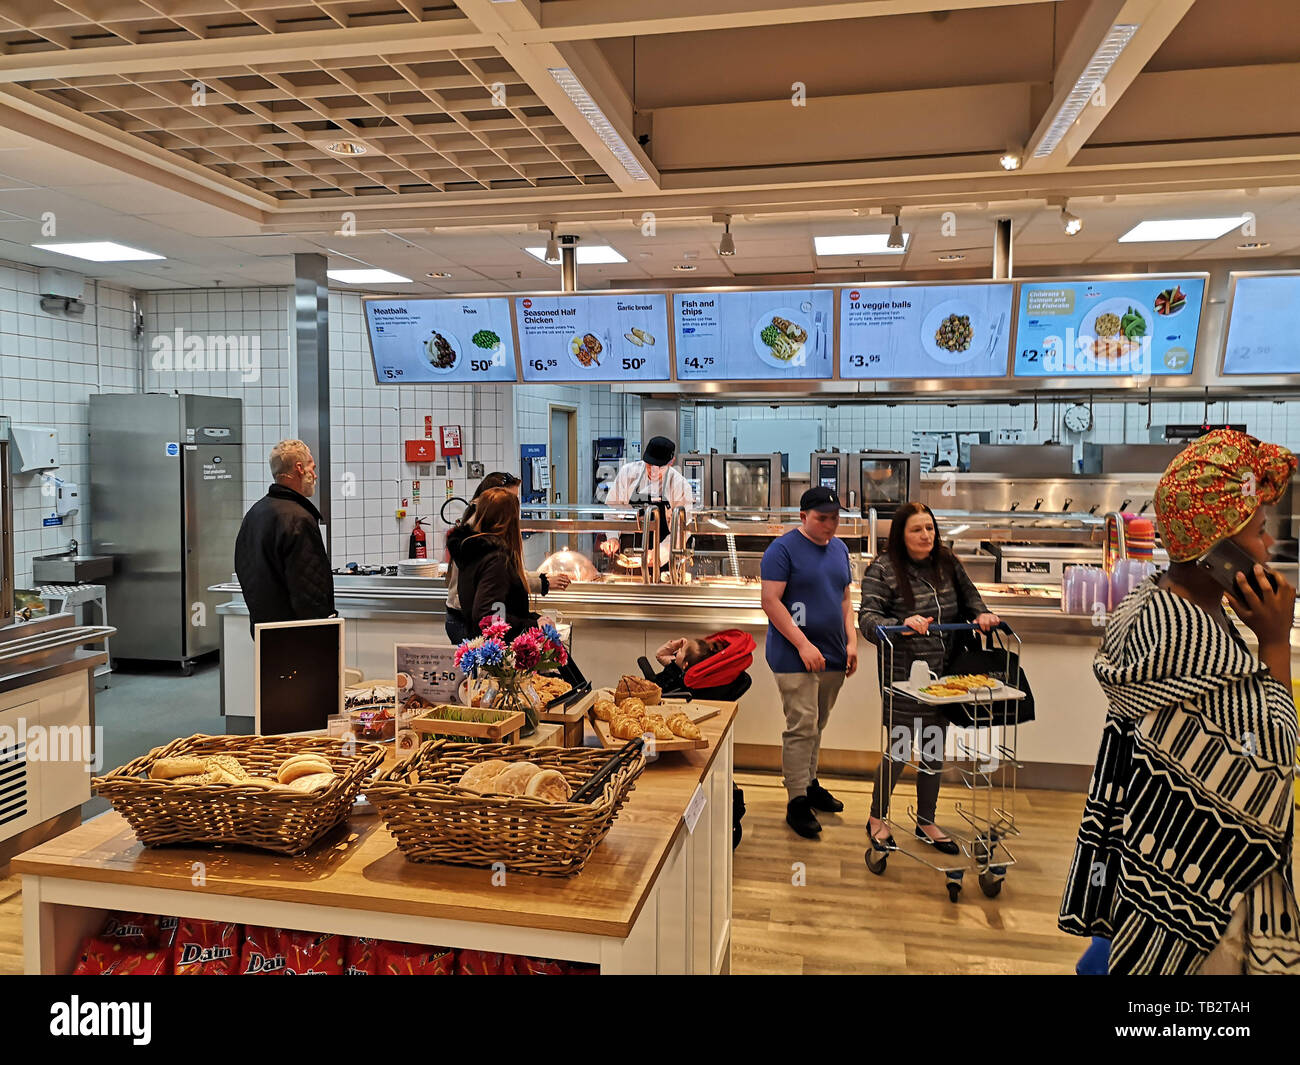 Restaurant at Ikea in Coventry, UK, on May 29, 2019. Stock Photo